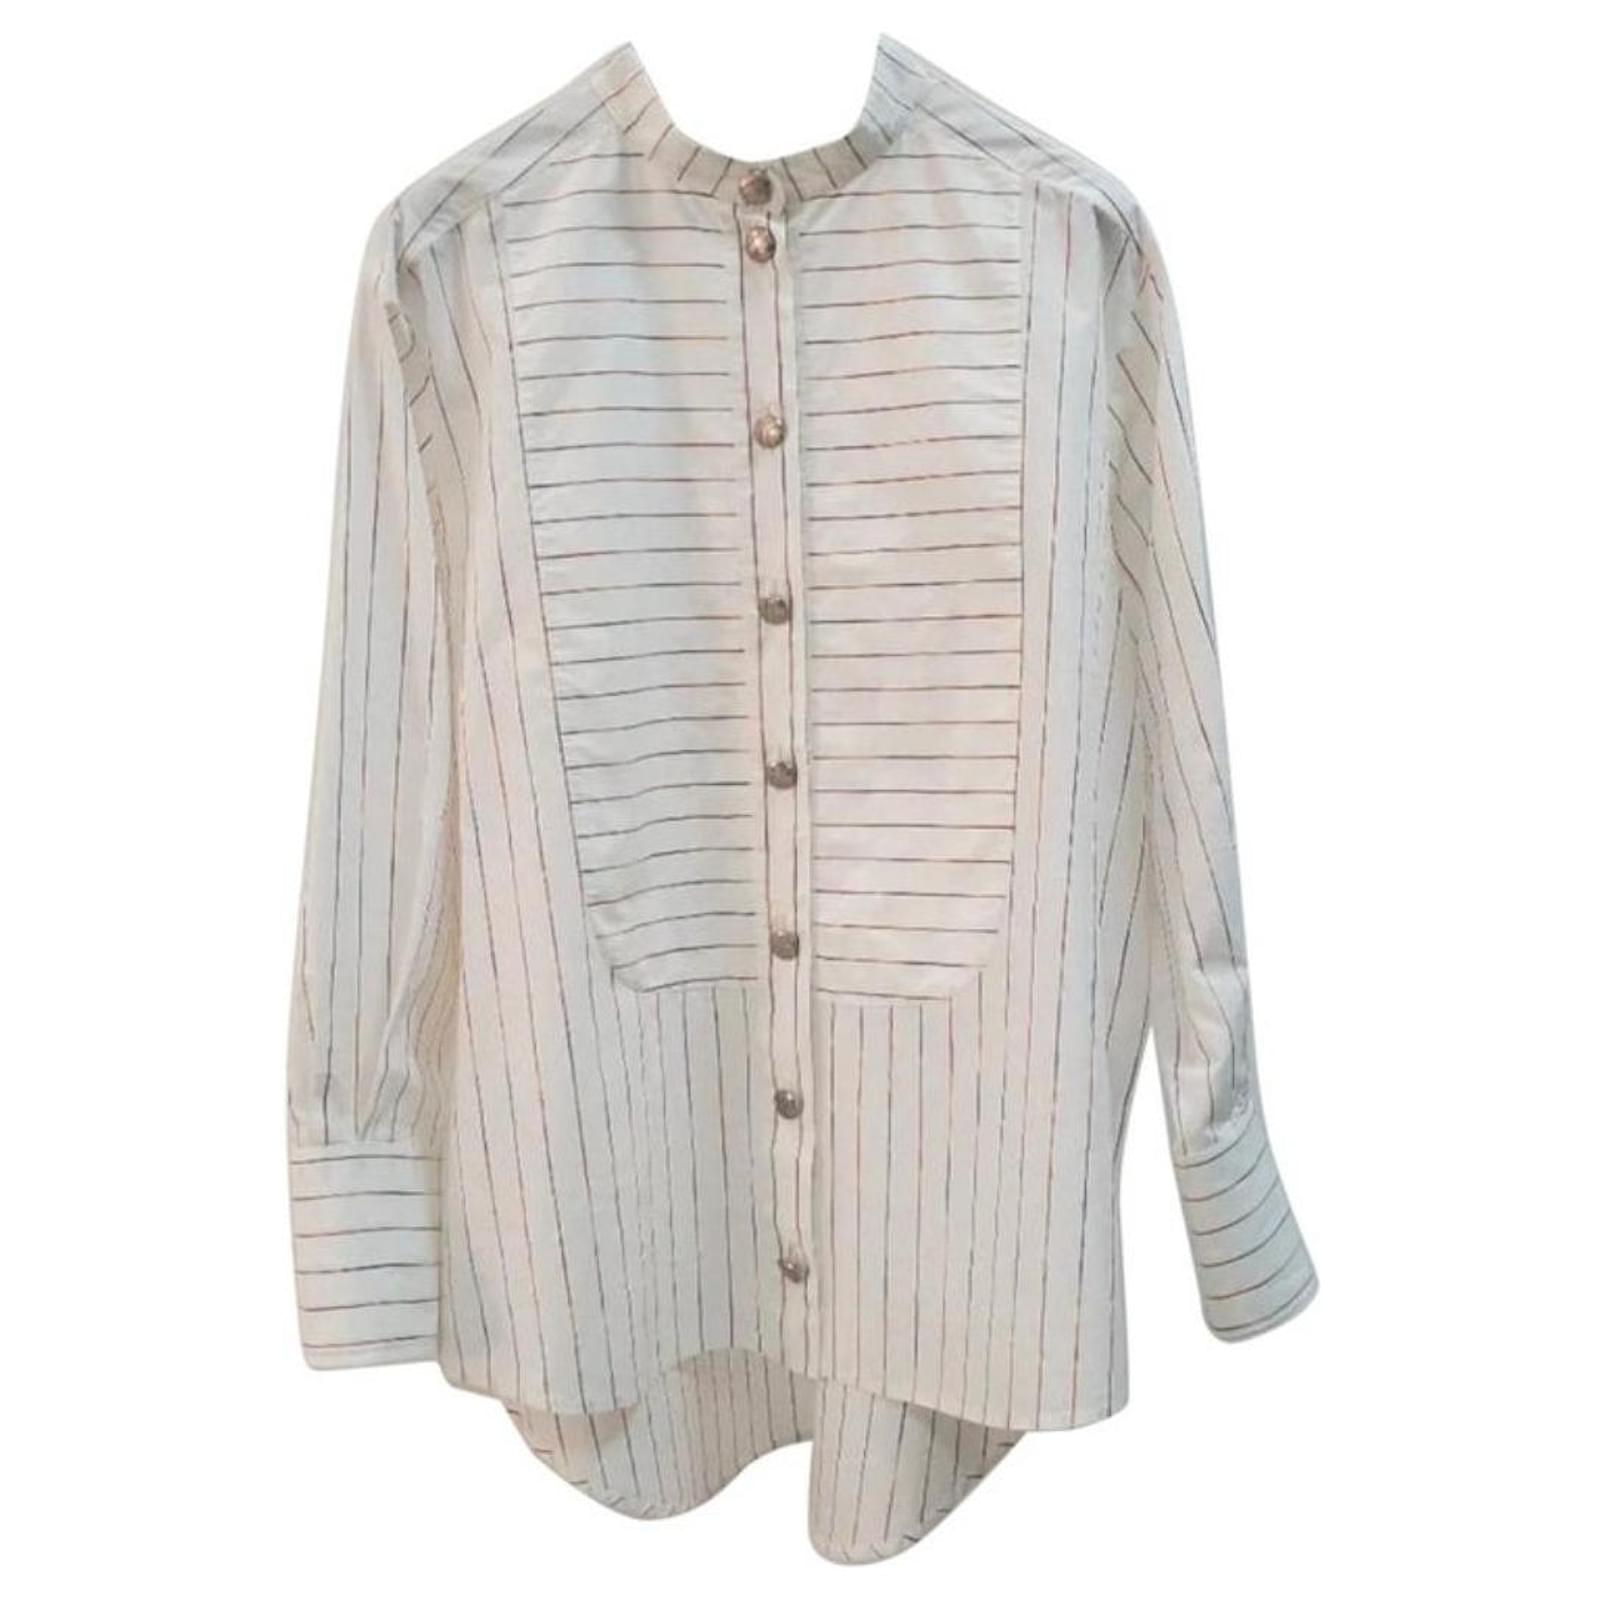 Tops Chanel Chanel White Striped Collarless Shirt Size 38 FR